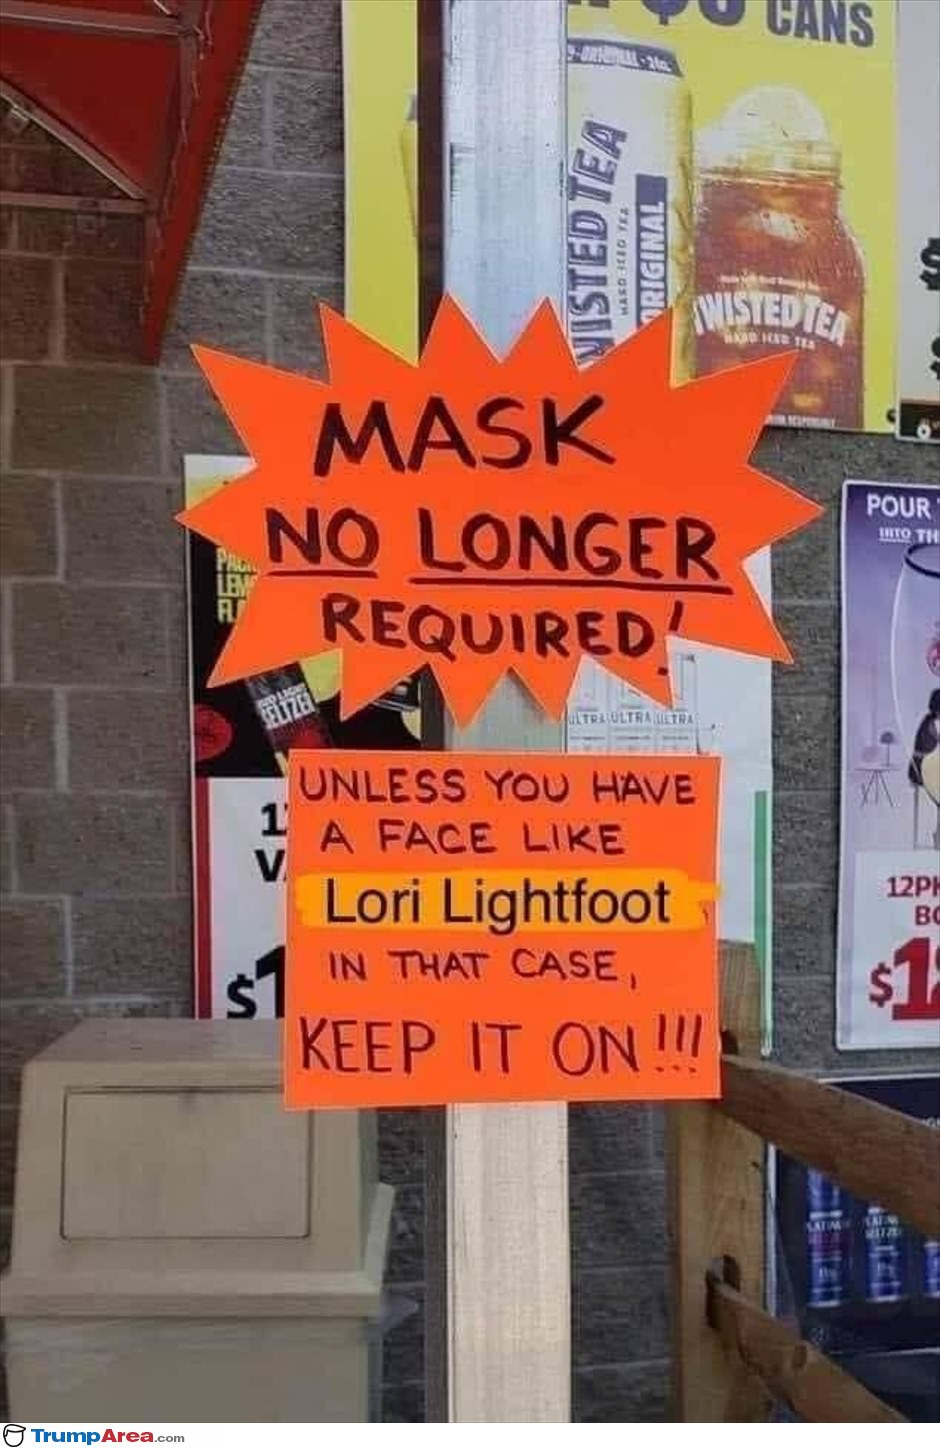 Mask No Longer Required